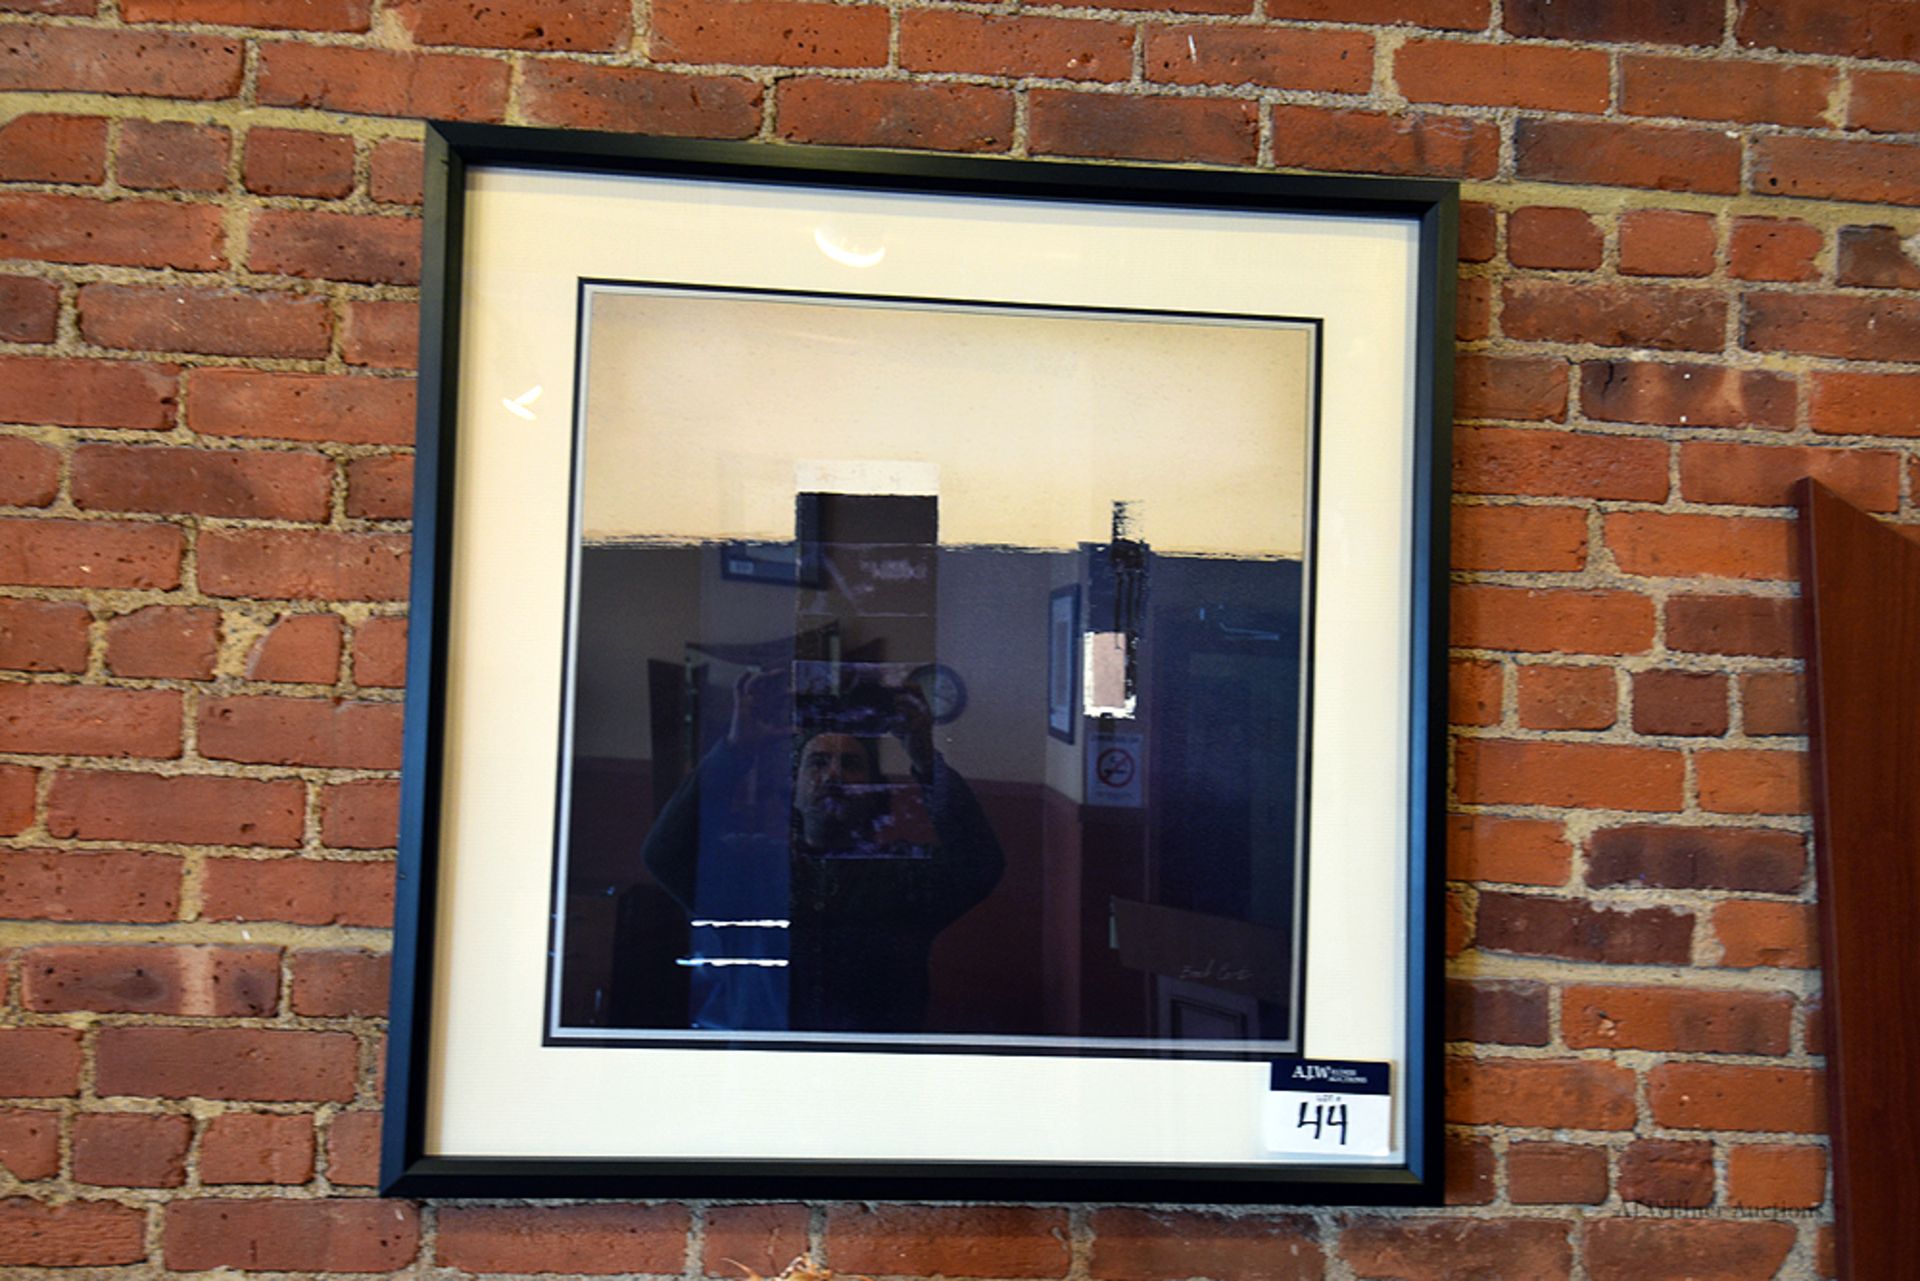 Artistic Photo, Framed, 34" x 34" - Image 2 of 9